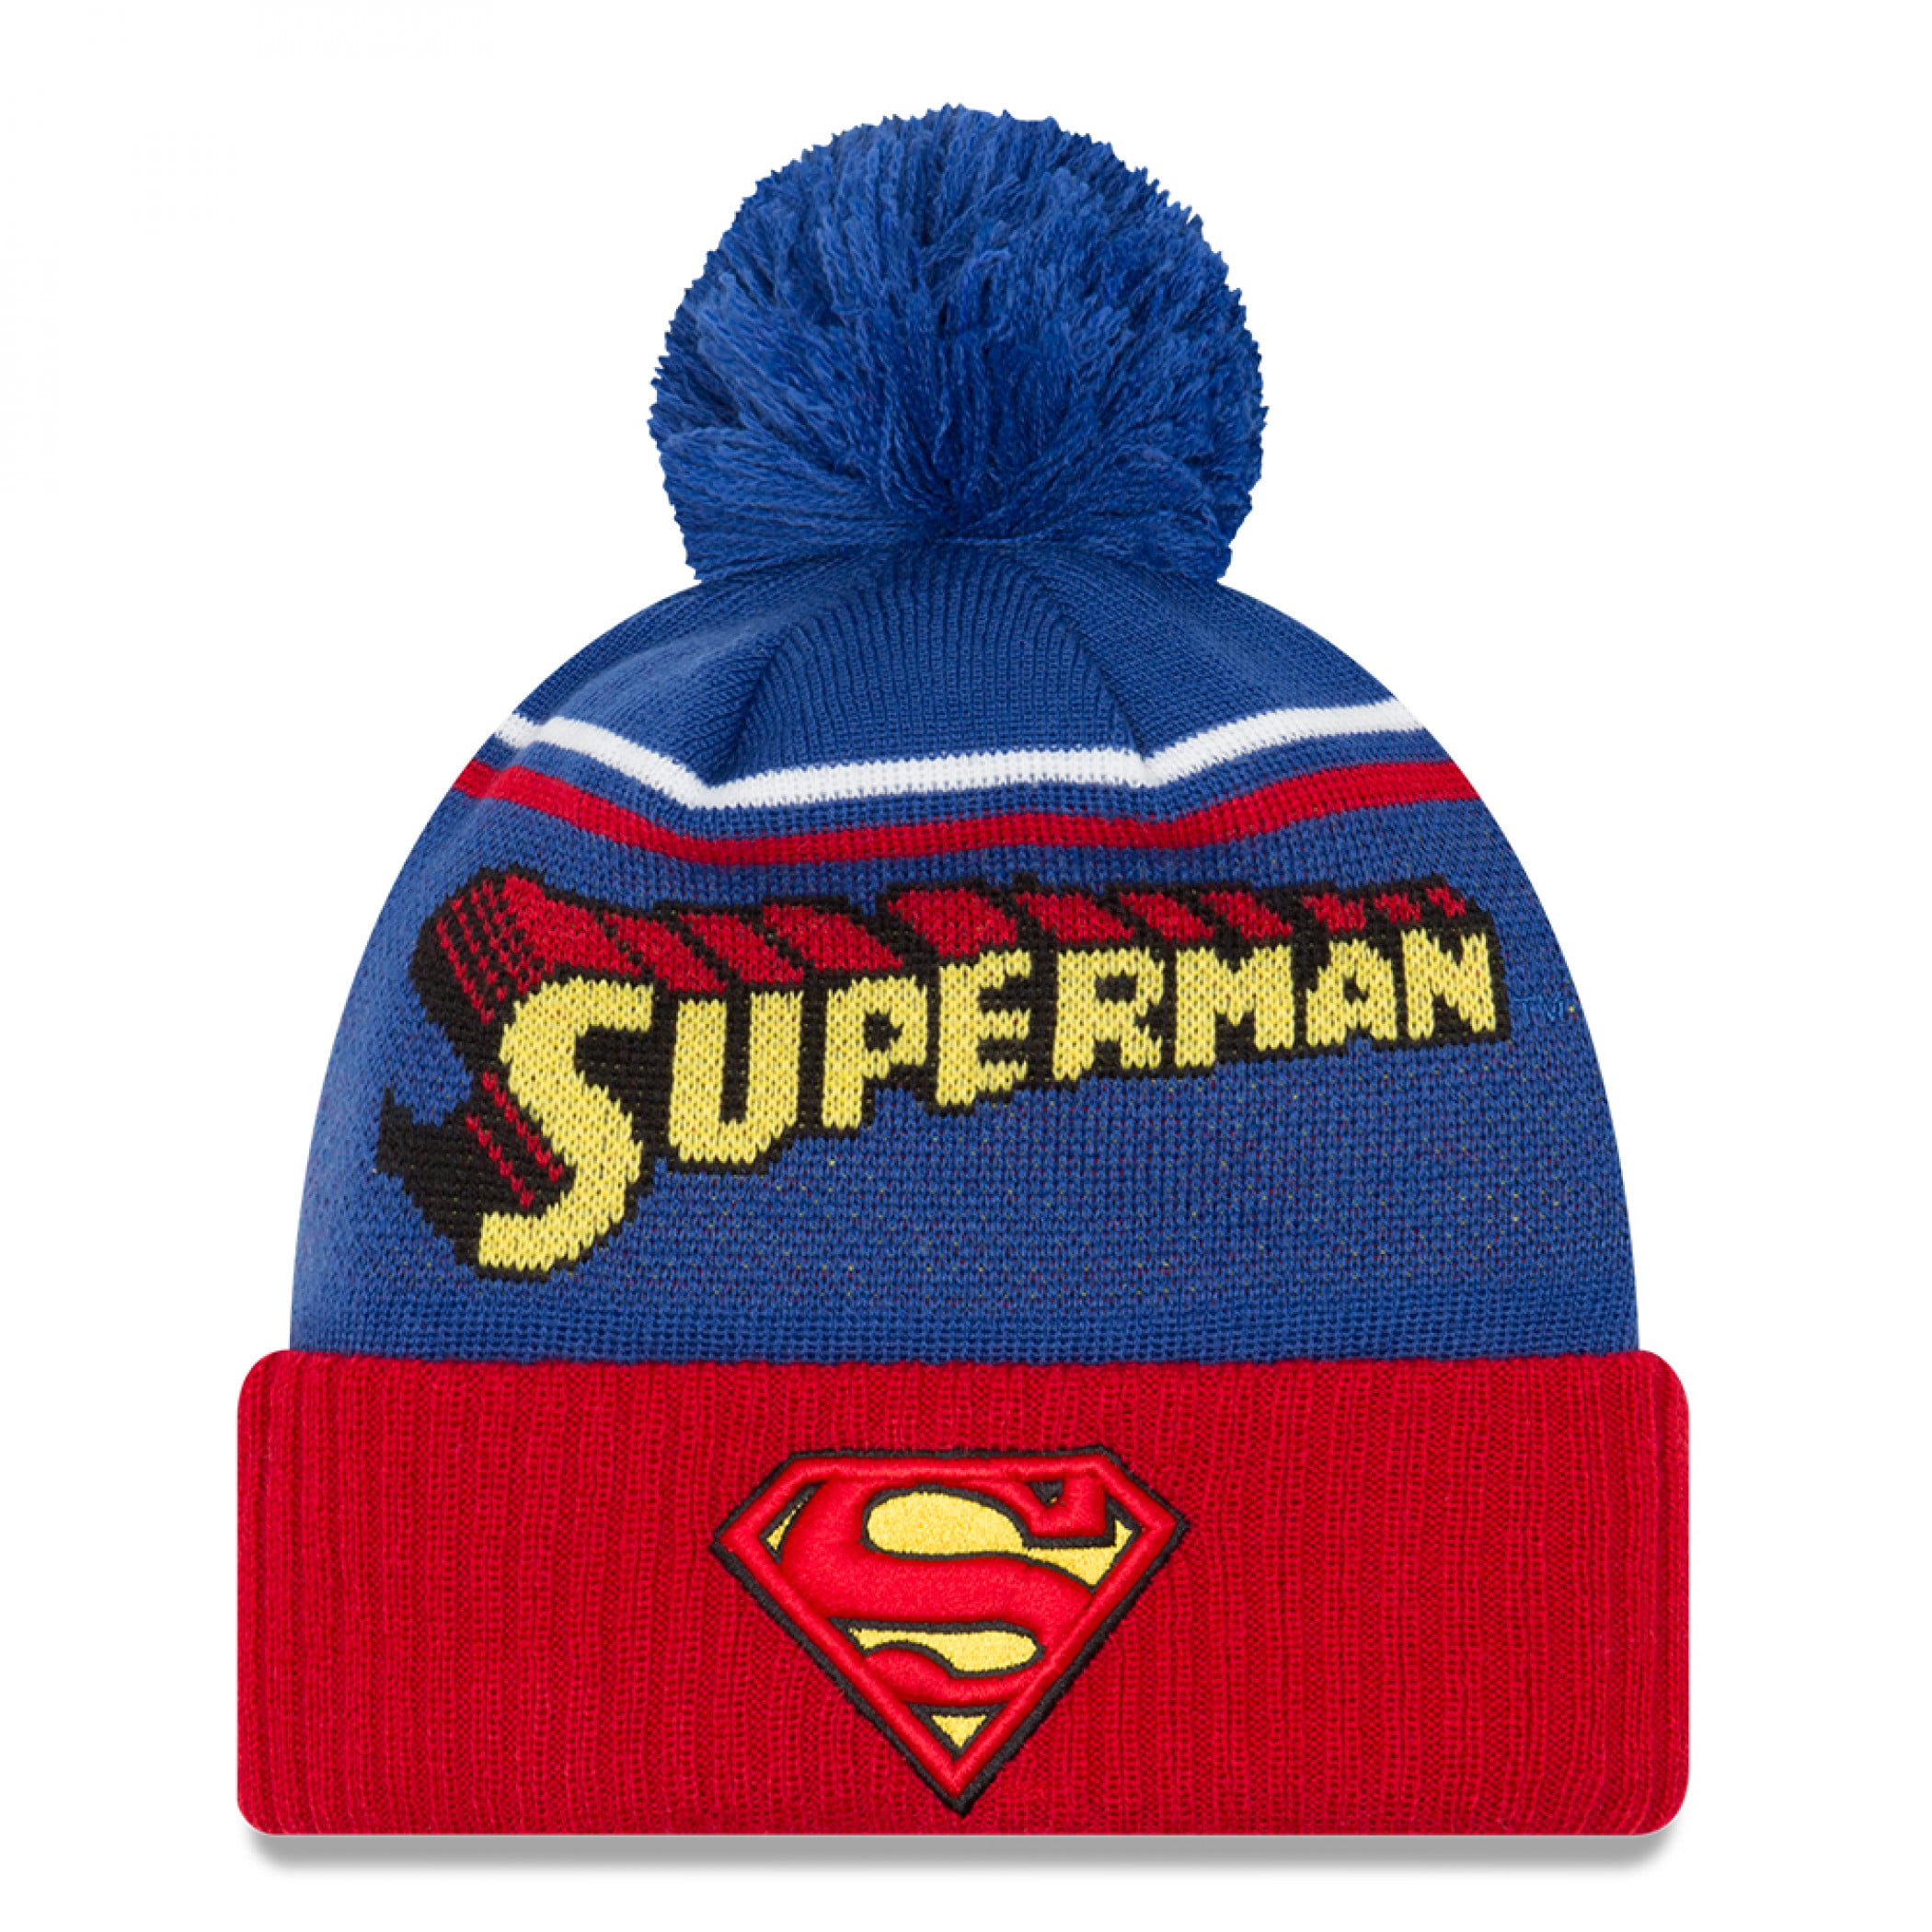 Superman DC Comics Licensed Slouch Beanie Hat 